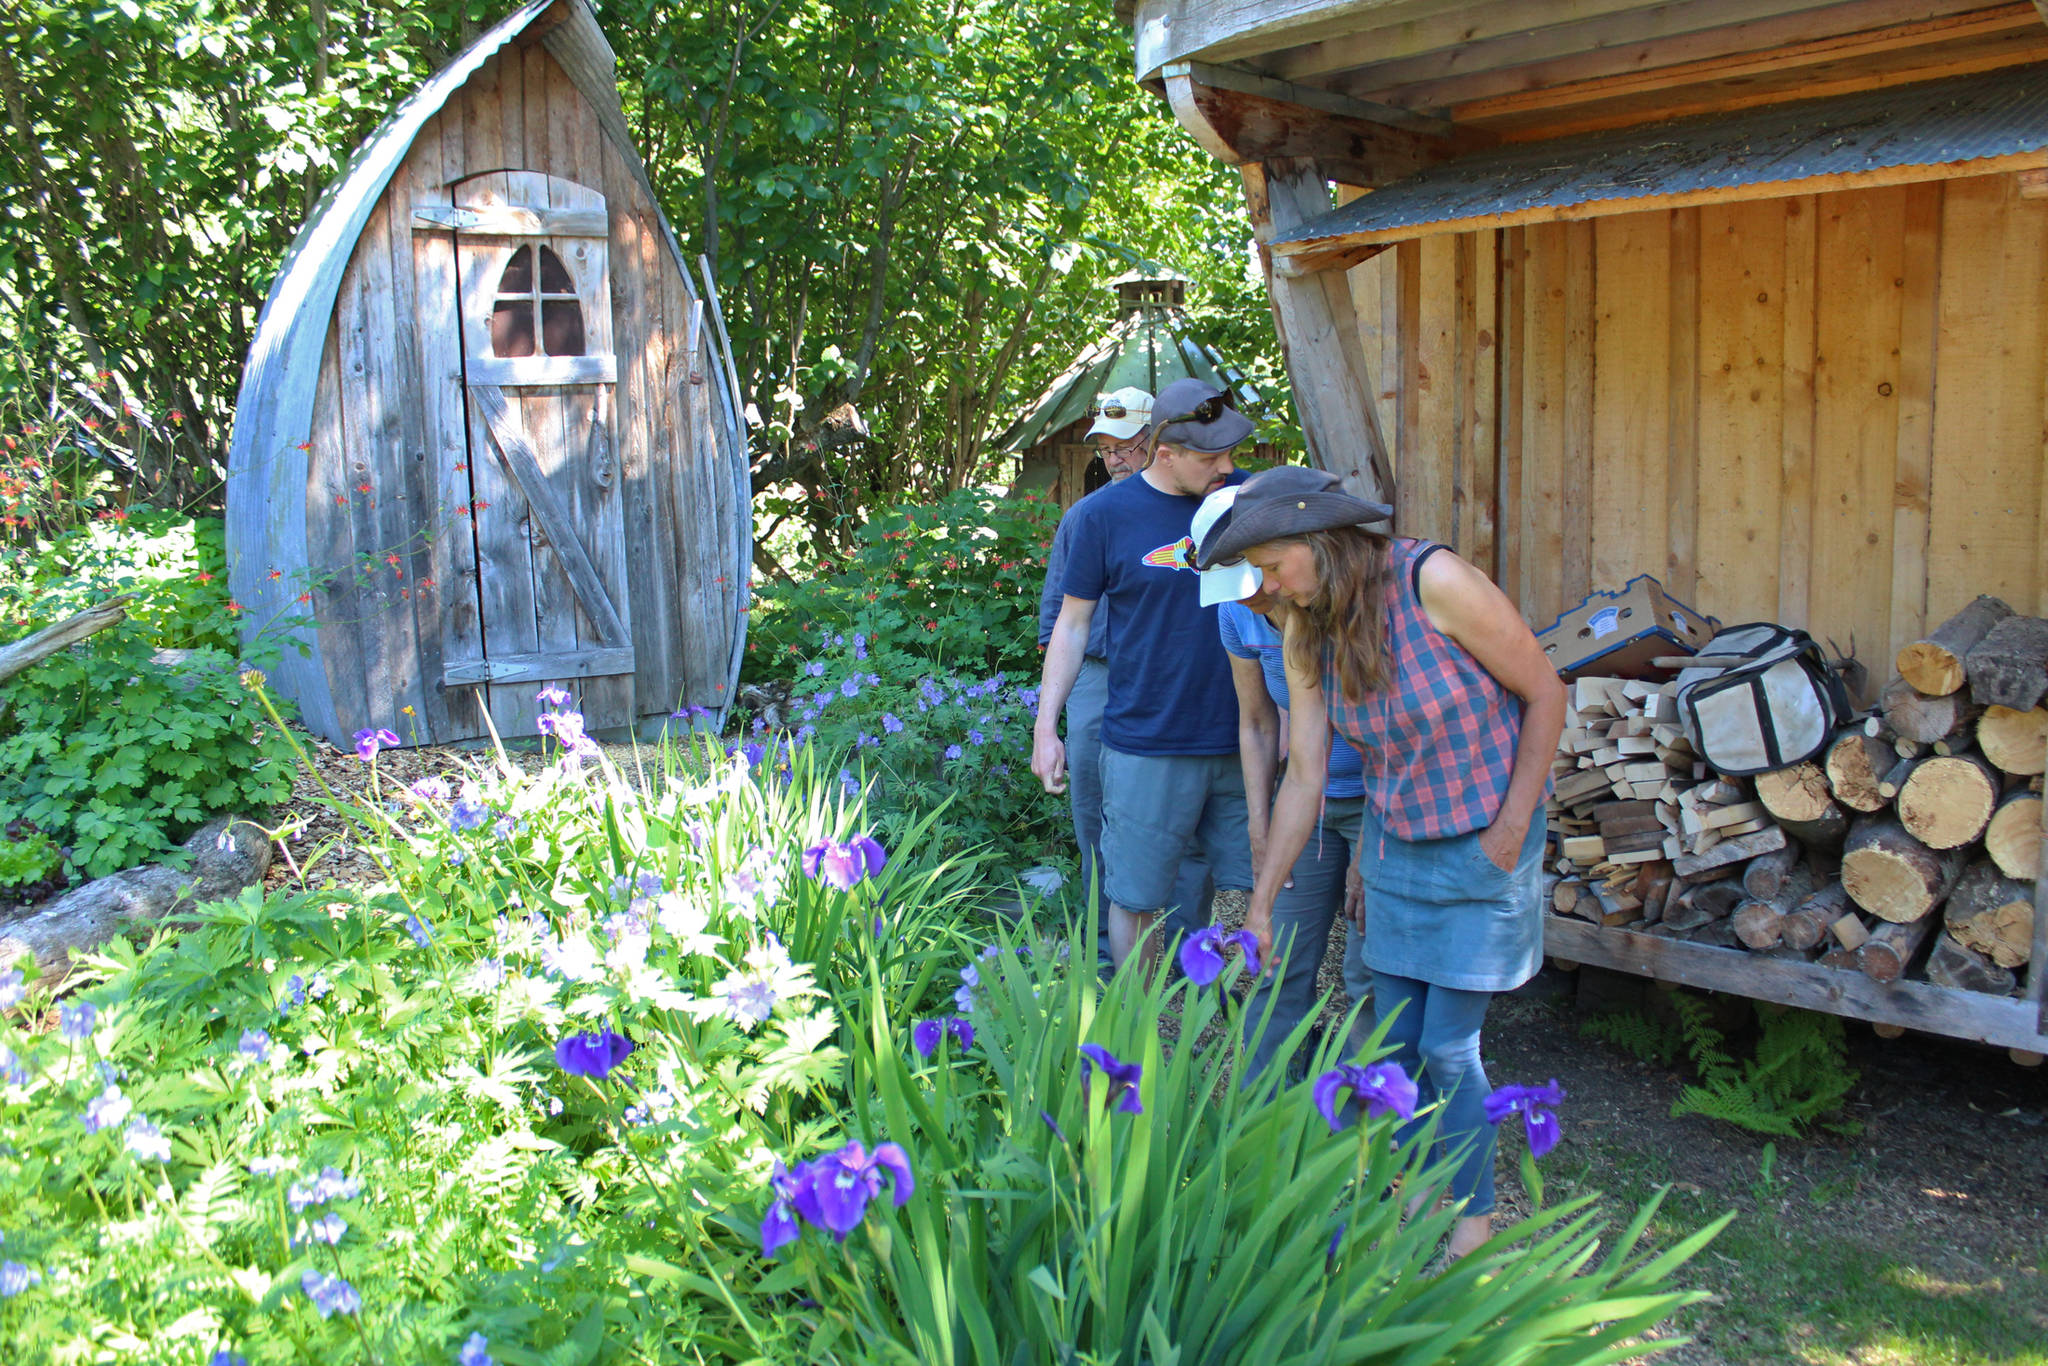 Ranja Dean leads a tour through her extensive gardens Friday, July 6, 2018 at her home off East End Road near Homer, Alaska. She and her husband host tours of their property and art studio. (Photo by Megan Pacer/Homer News)